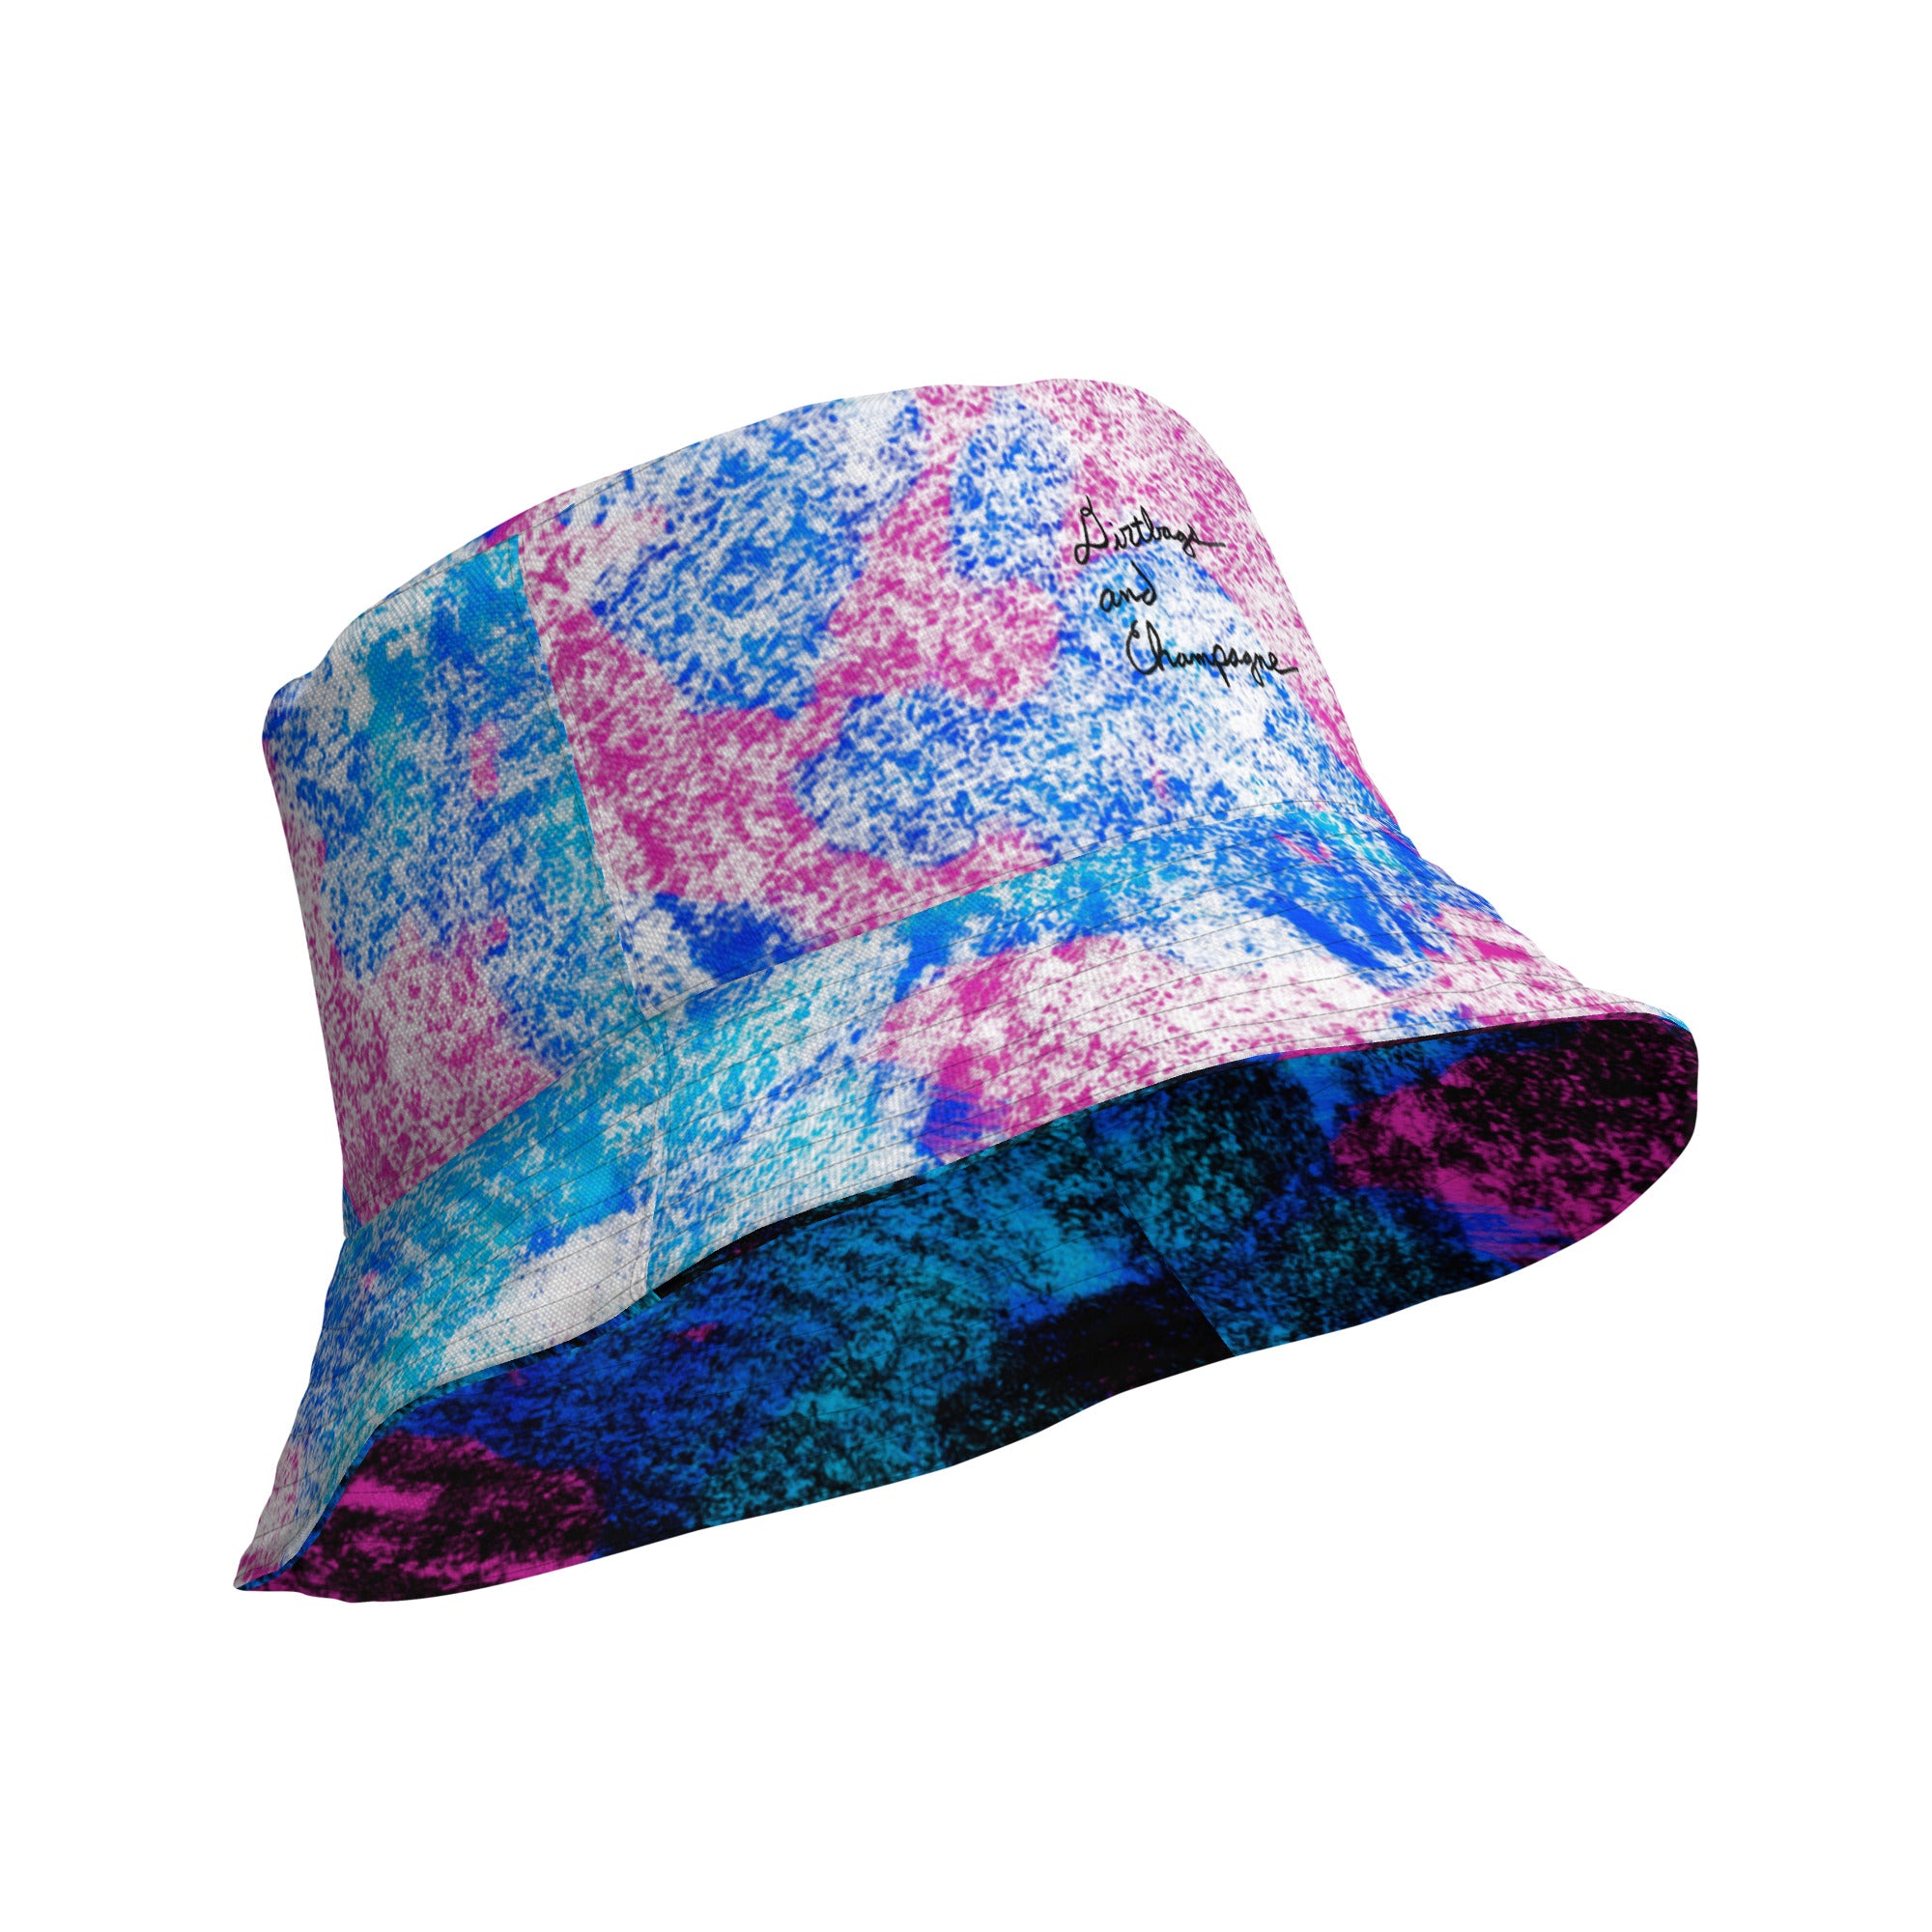 Black or white with cerulean and magenta Reversible bucket hat